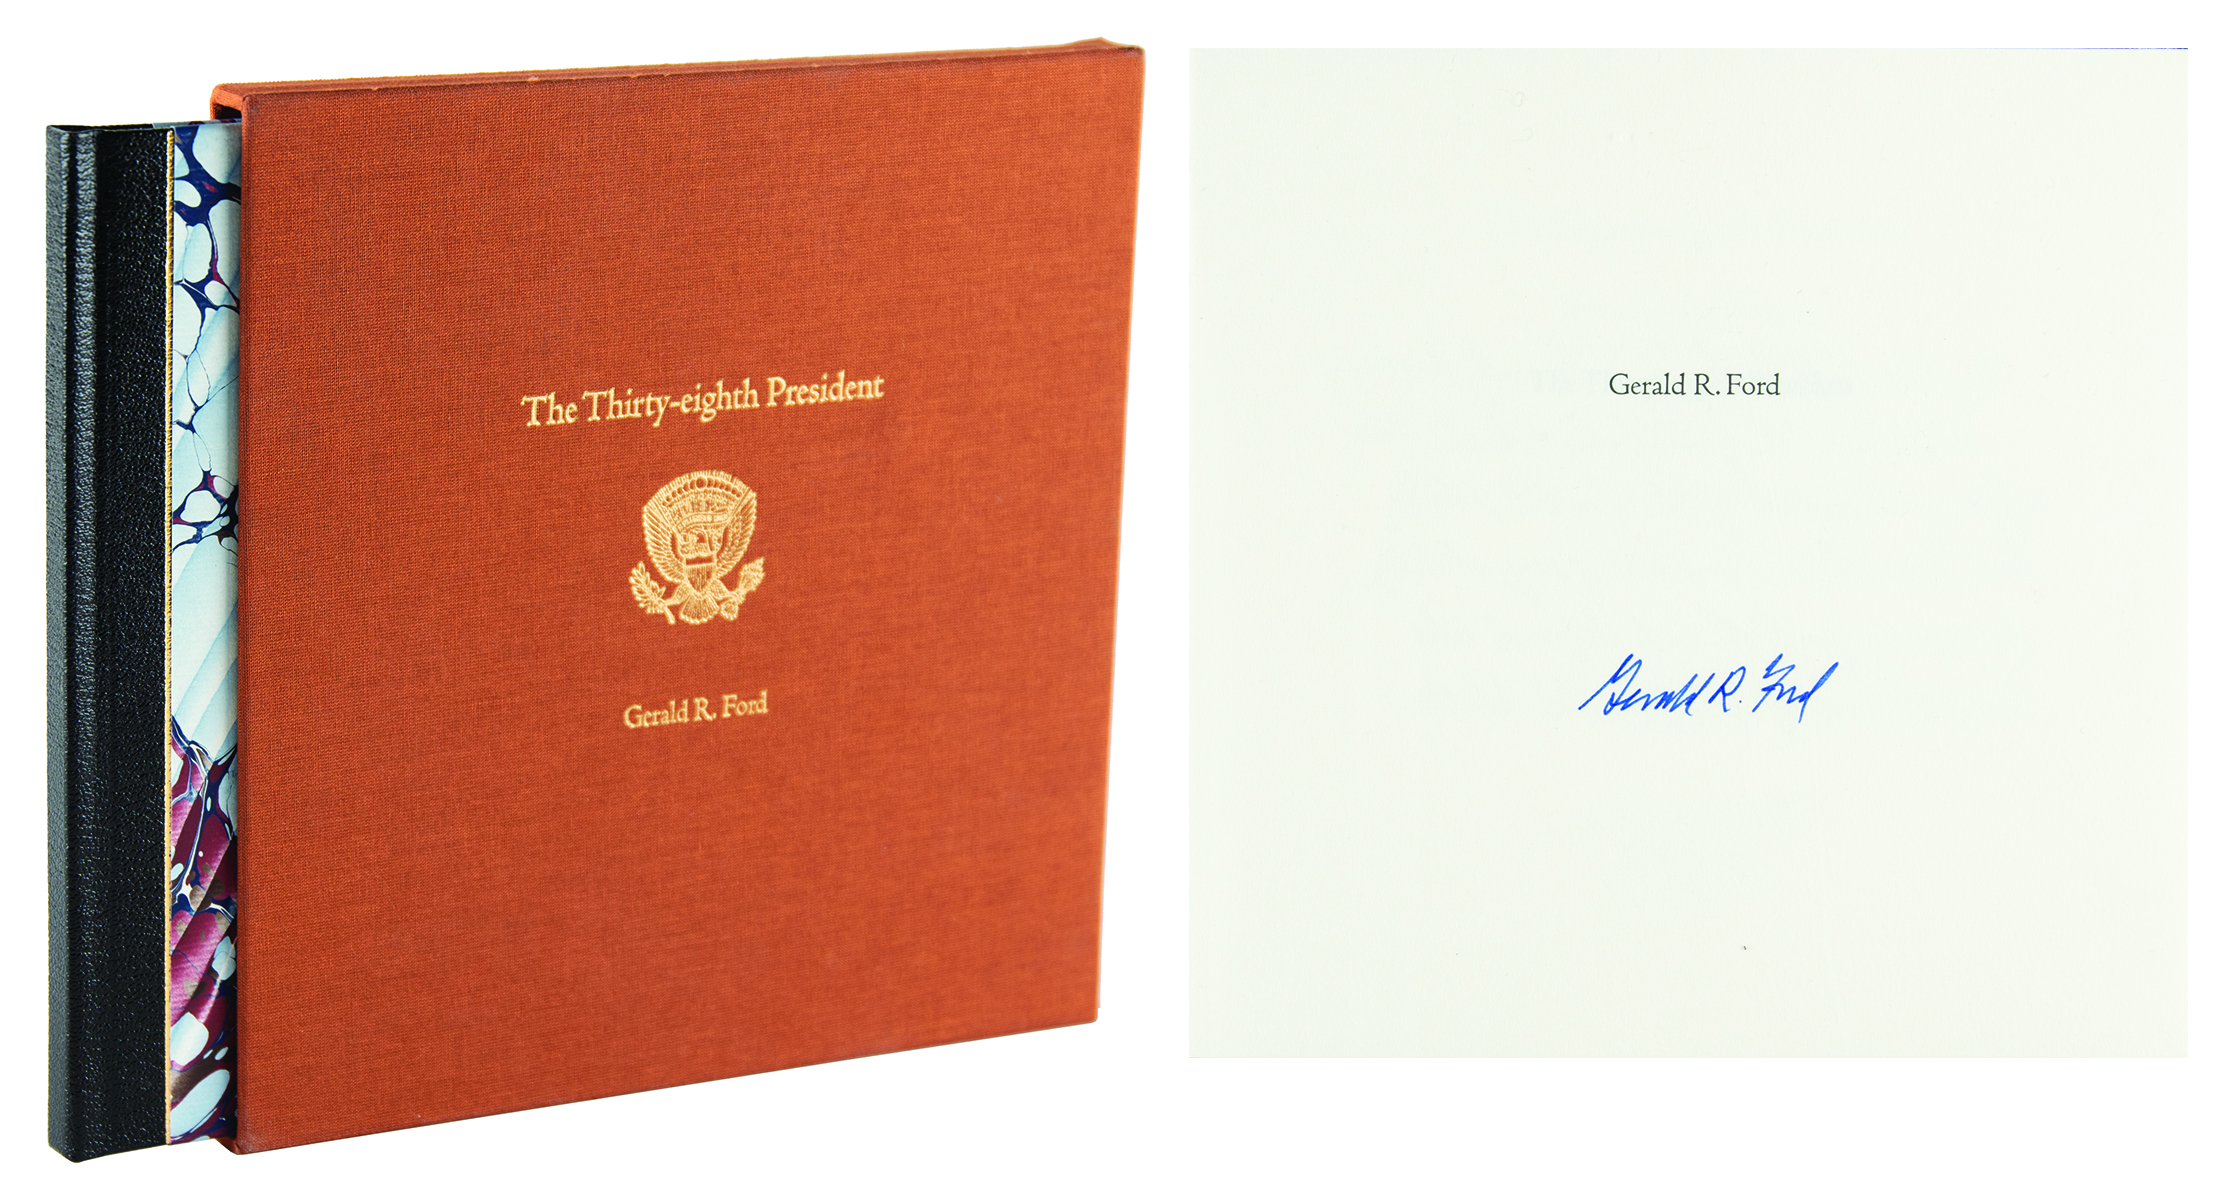 Lot #64 Gerald Ford Signed Book - Image 1